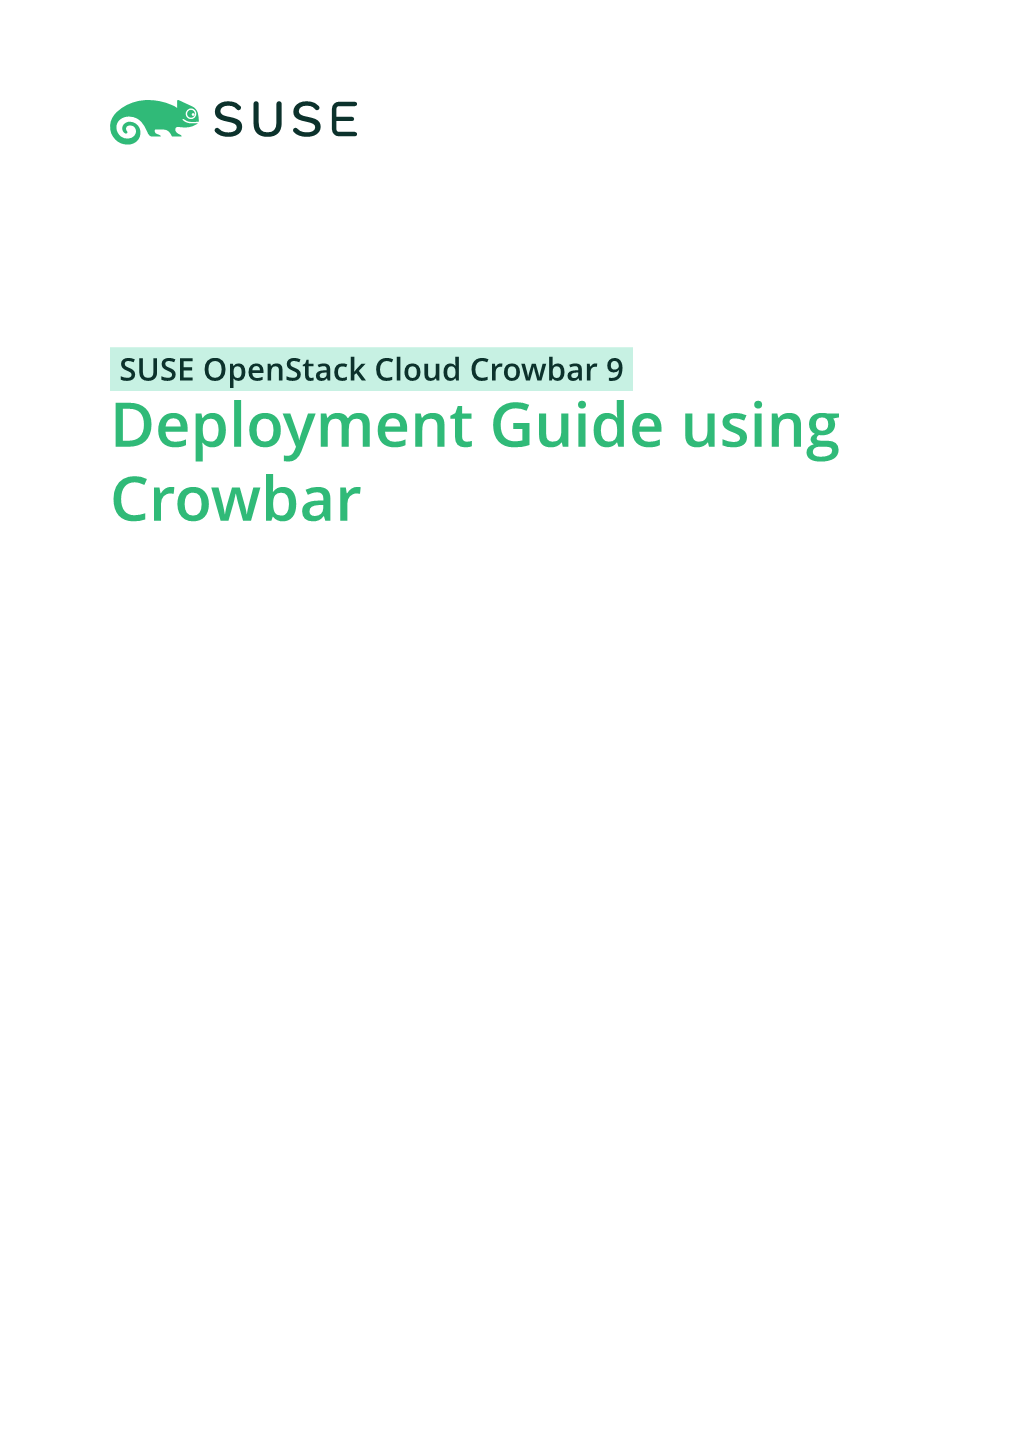 SUSE Openstack Cloud Crowbar 9 Deployment Guide Using Crowbar Deployment Guide Using Crowbar SUSE Openstack Cloud Crowbar 9